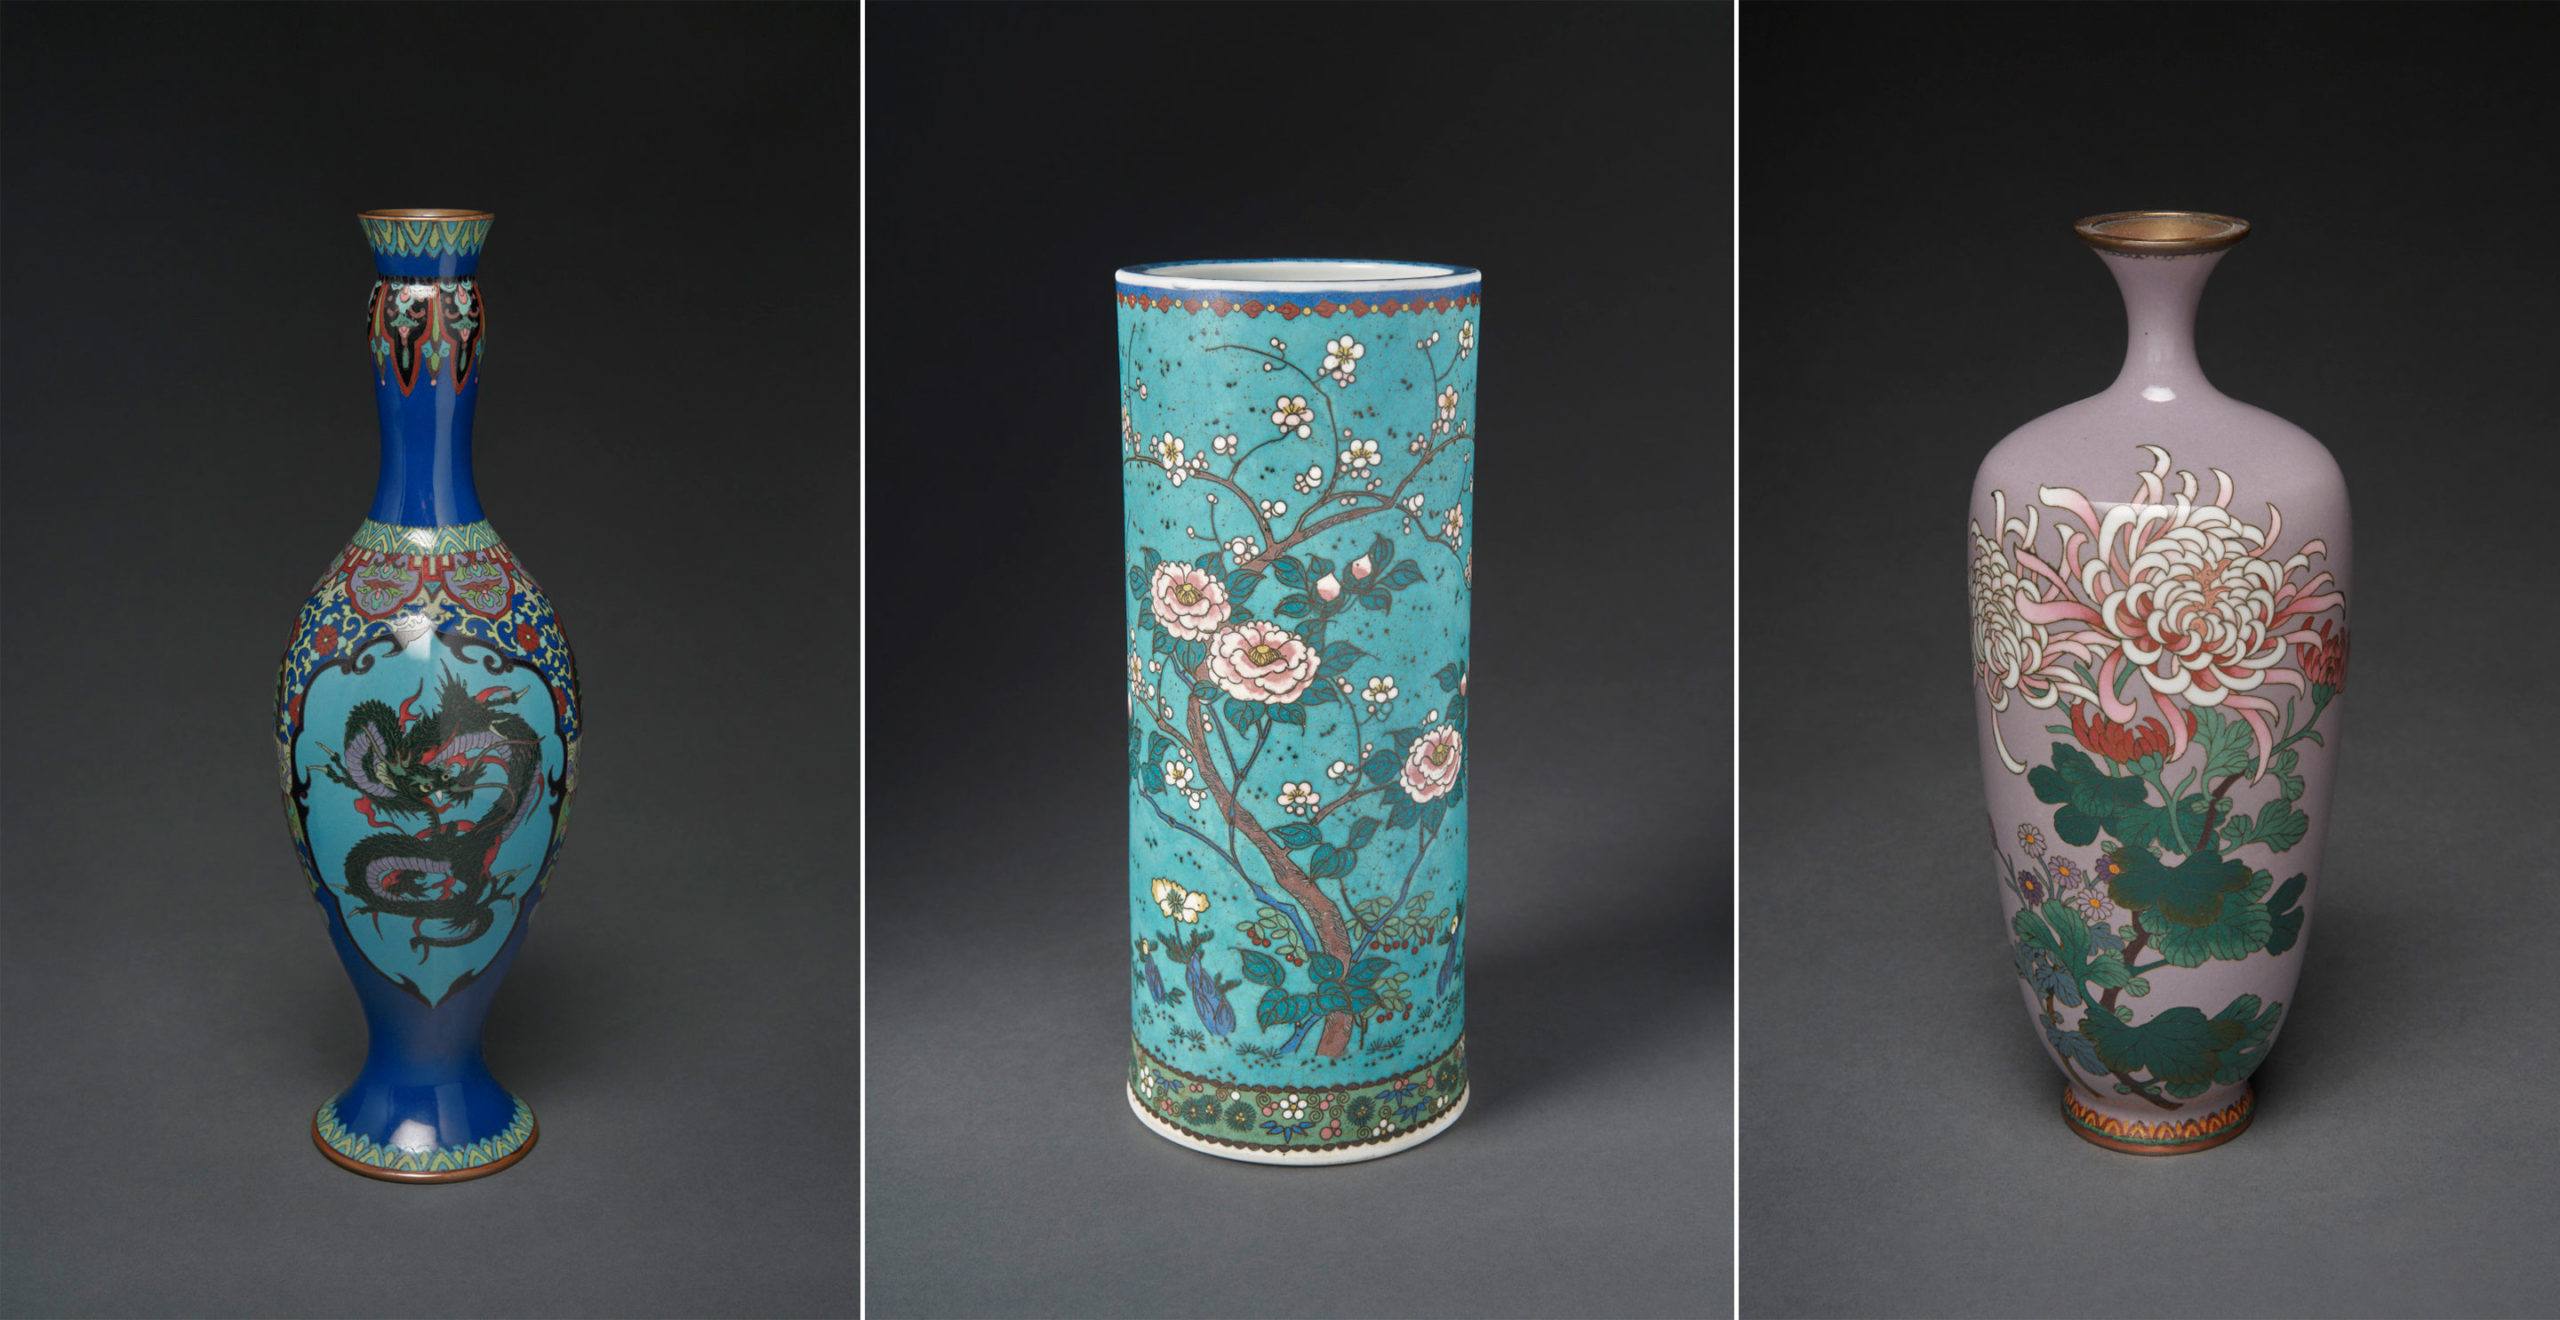 Unknown, Dragon and phoenix vase, Meiji period, 1885-1890. Ginbari cloisonné. Proposed gift of Waynor and Laurie Rogers; Unknown, Vase, Meiji period, 1870-1880. Totai shippo cloisonné. Proposed gift of Waynor and Laurie Rogers; Unknown, Chrysanthemum vase, Meiji period, 1890-1910. Cloisonné. Proposed gift of Waynor and Laurie Rogers.